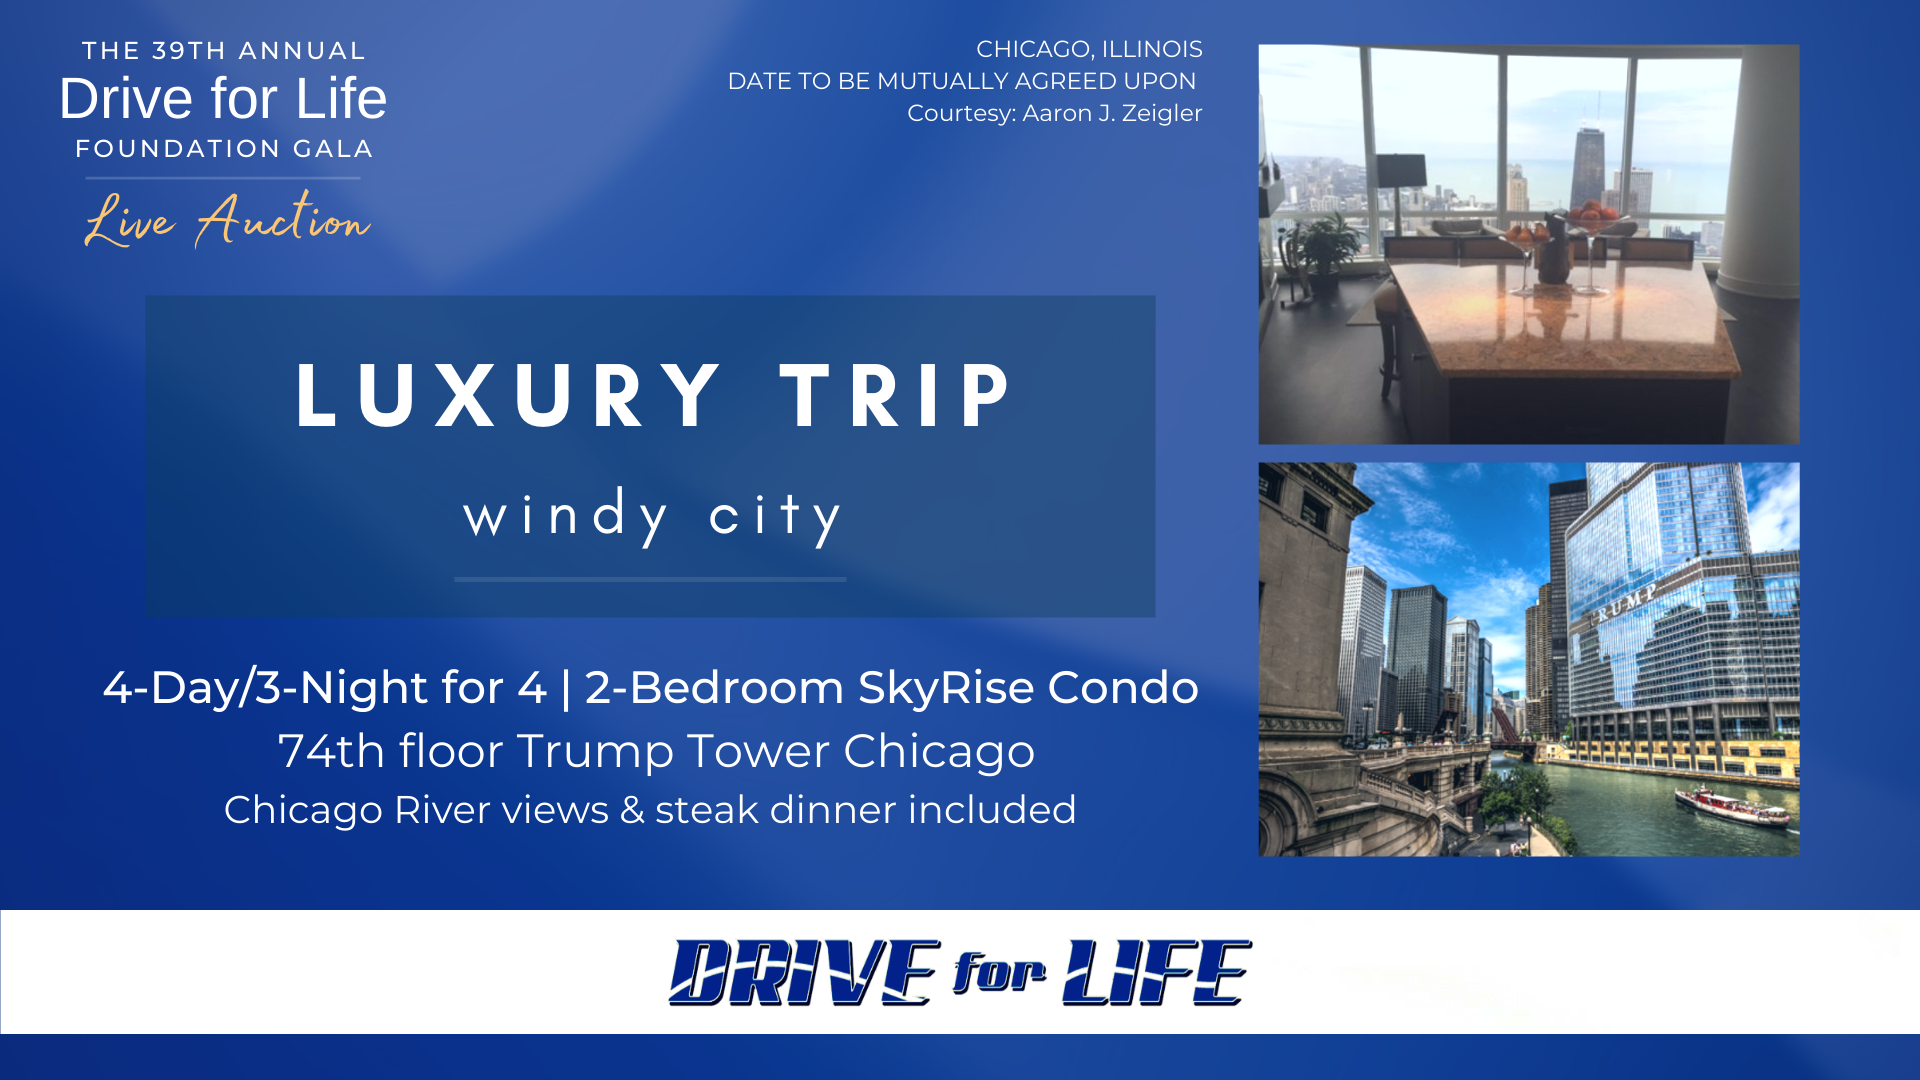 LIVE AUCTION EXPERIENCE:  A Luxury Trip to the Windy City -Available at the 39th Annual Drive for Life Foundation Monday, September 13, 2021 at 6:30 p.m. at the Radisson Plaza Hotel